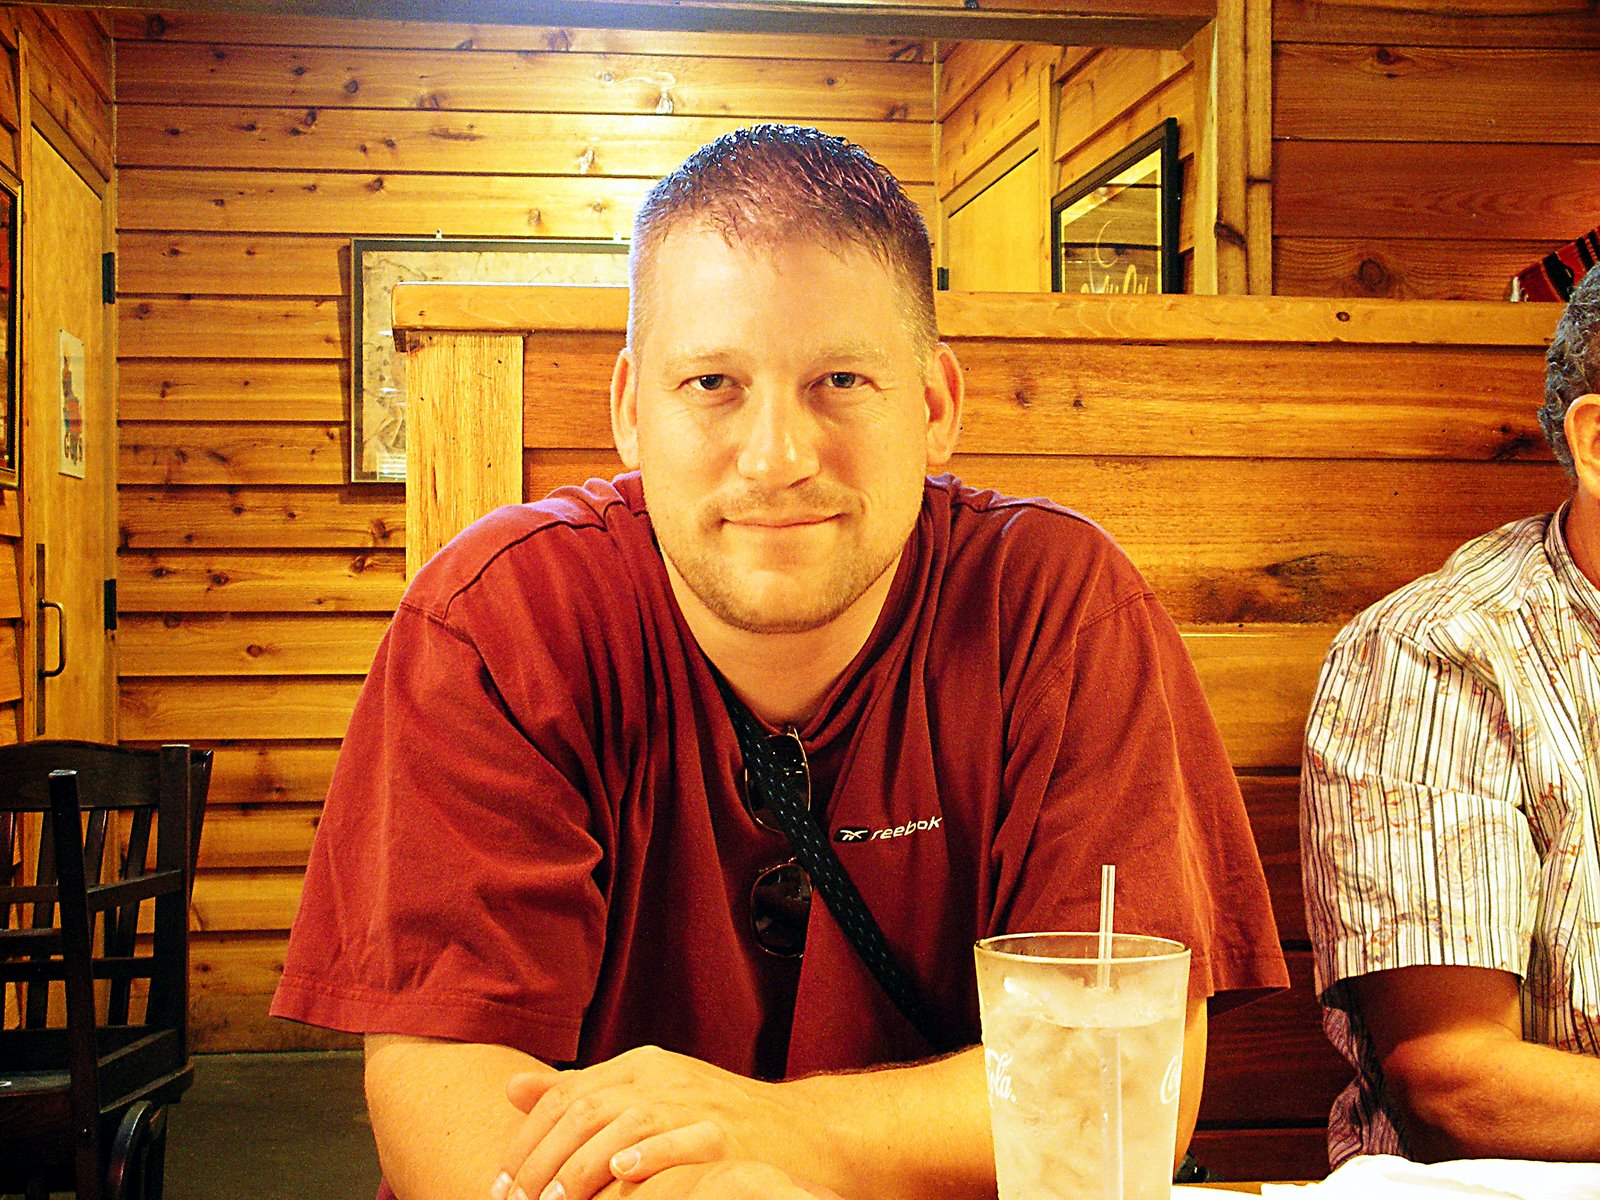 [Ryan+Dad+at+Texas+Roadhouse+BARBEQUE.jpg]